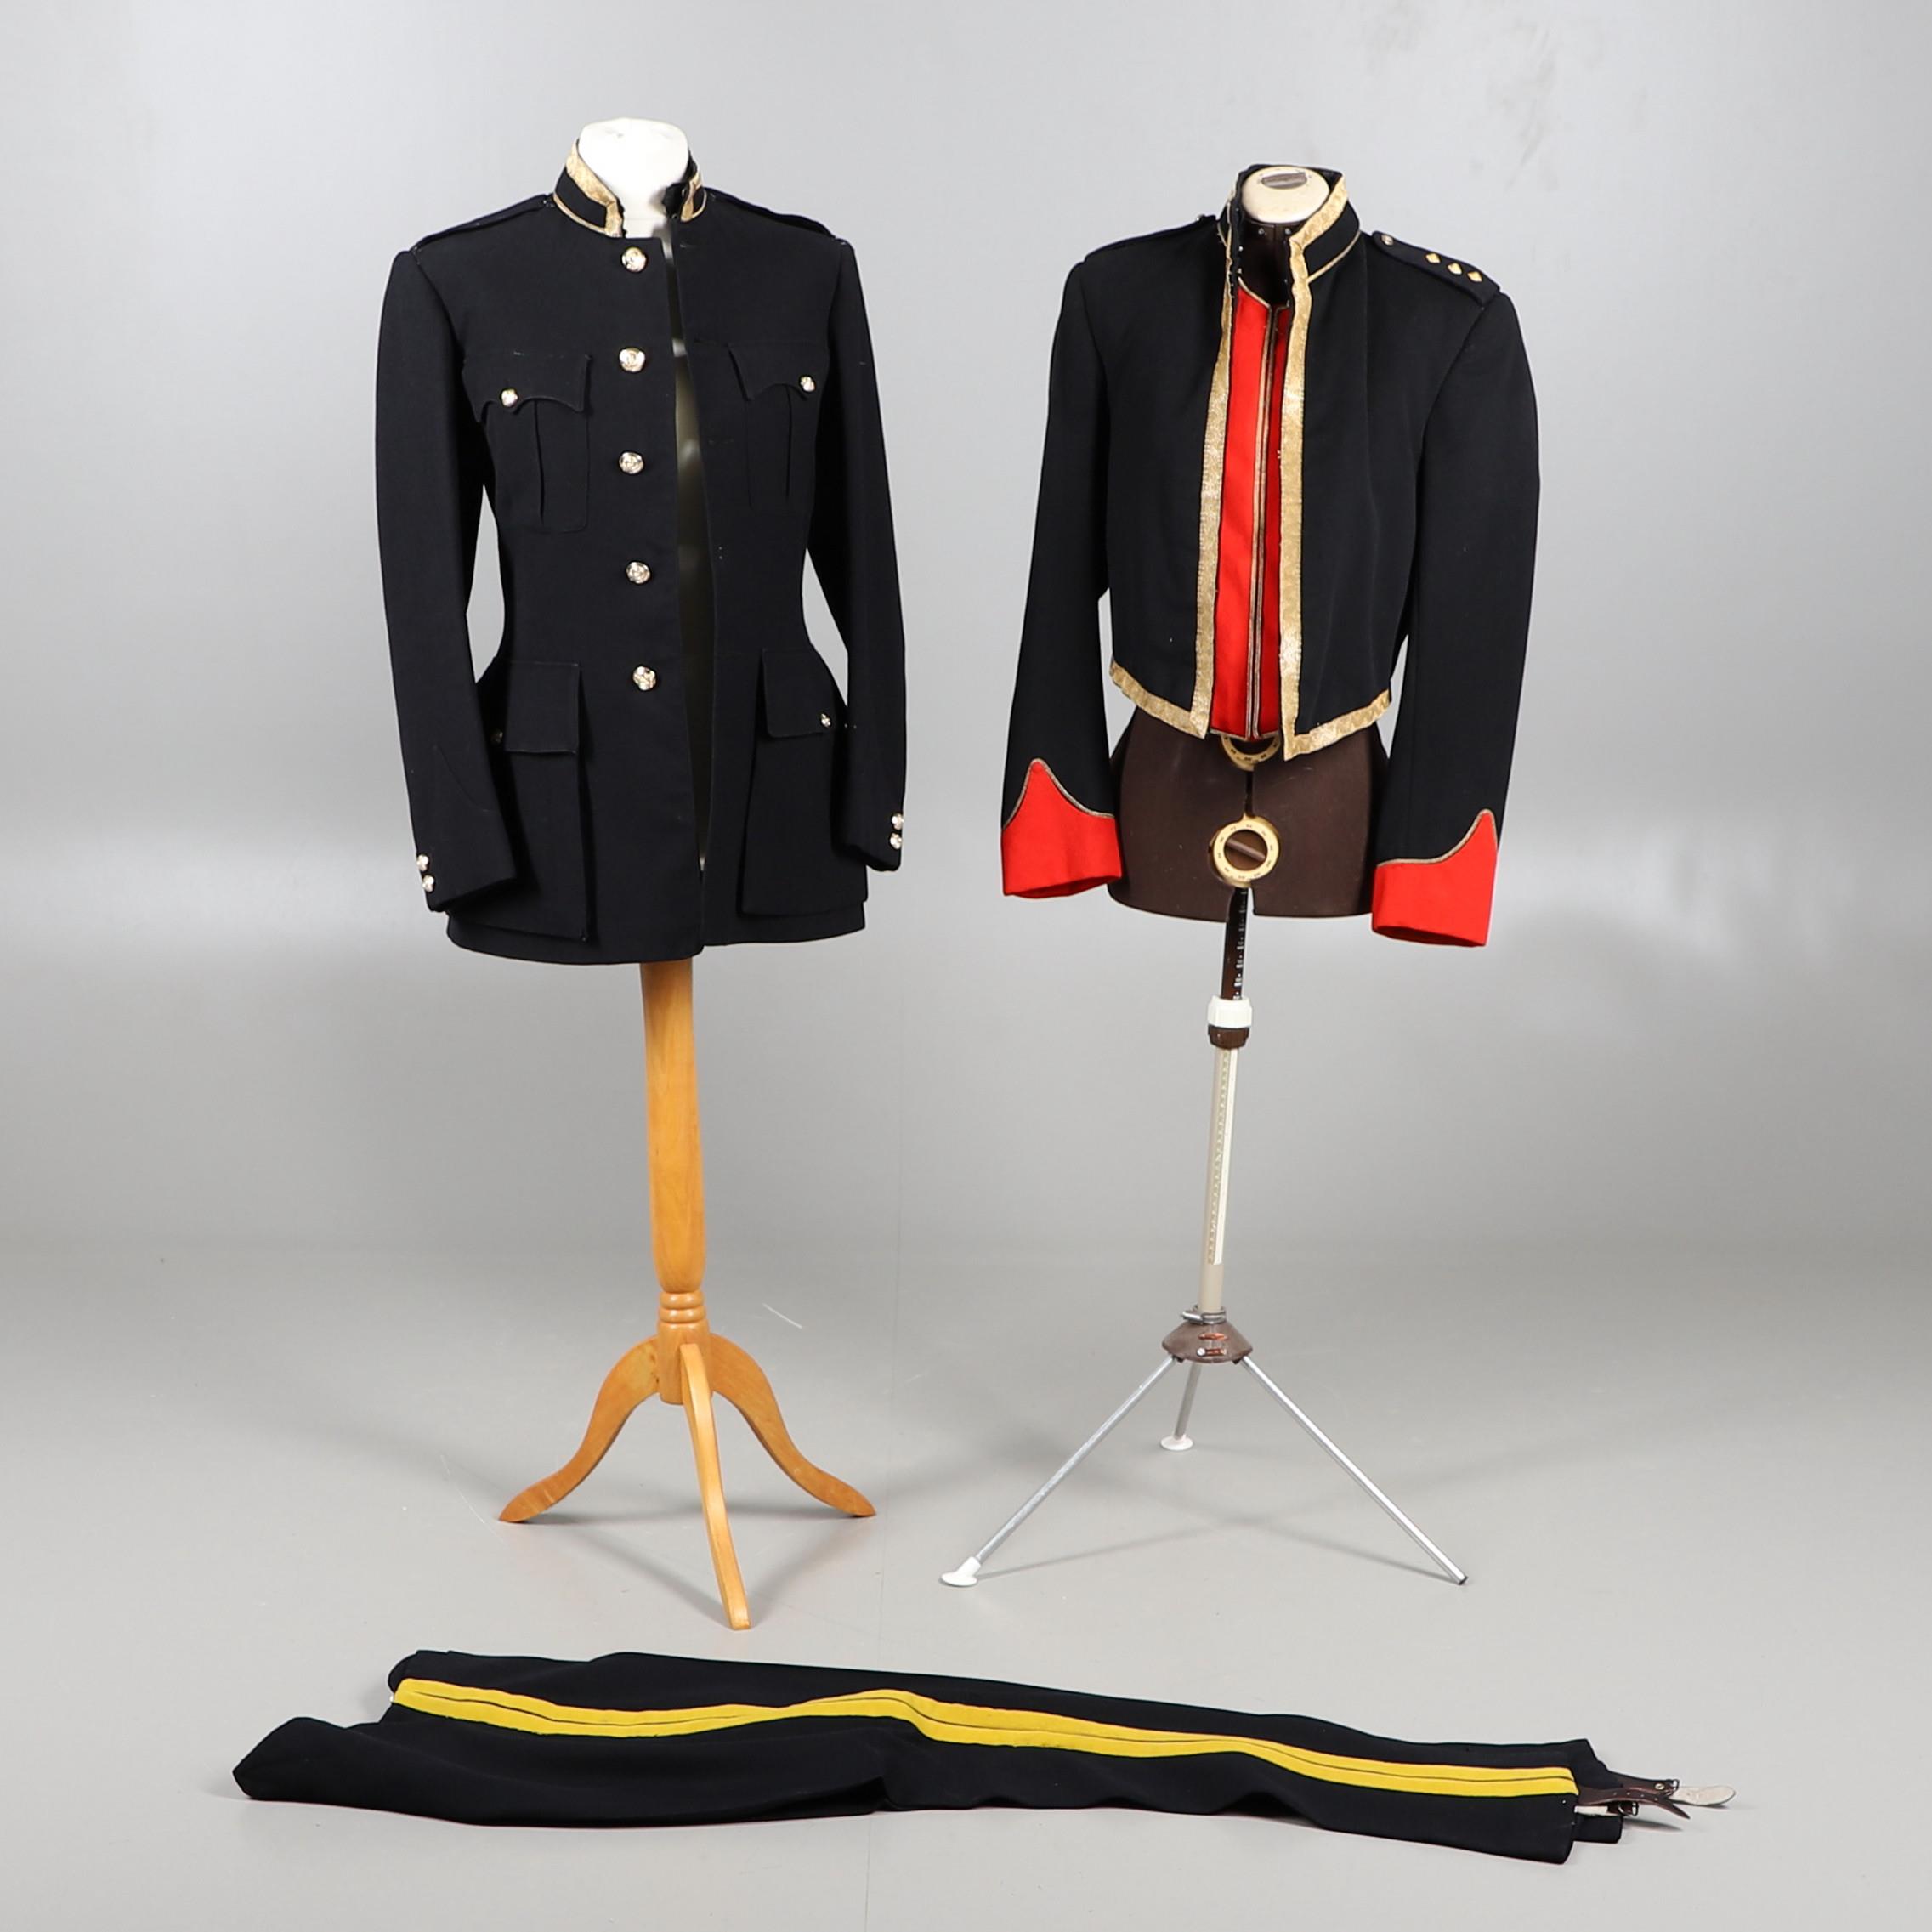 A POST SECOND WORLD WAR MESS JACKET AND BLUES UNIFORM FOR THE 15/19TH HUSSARS.